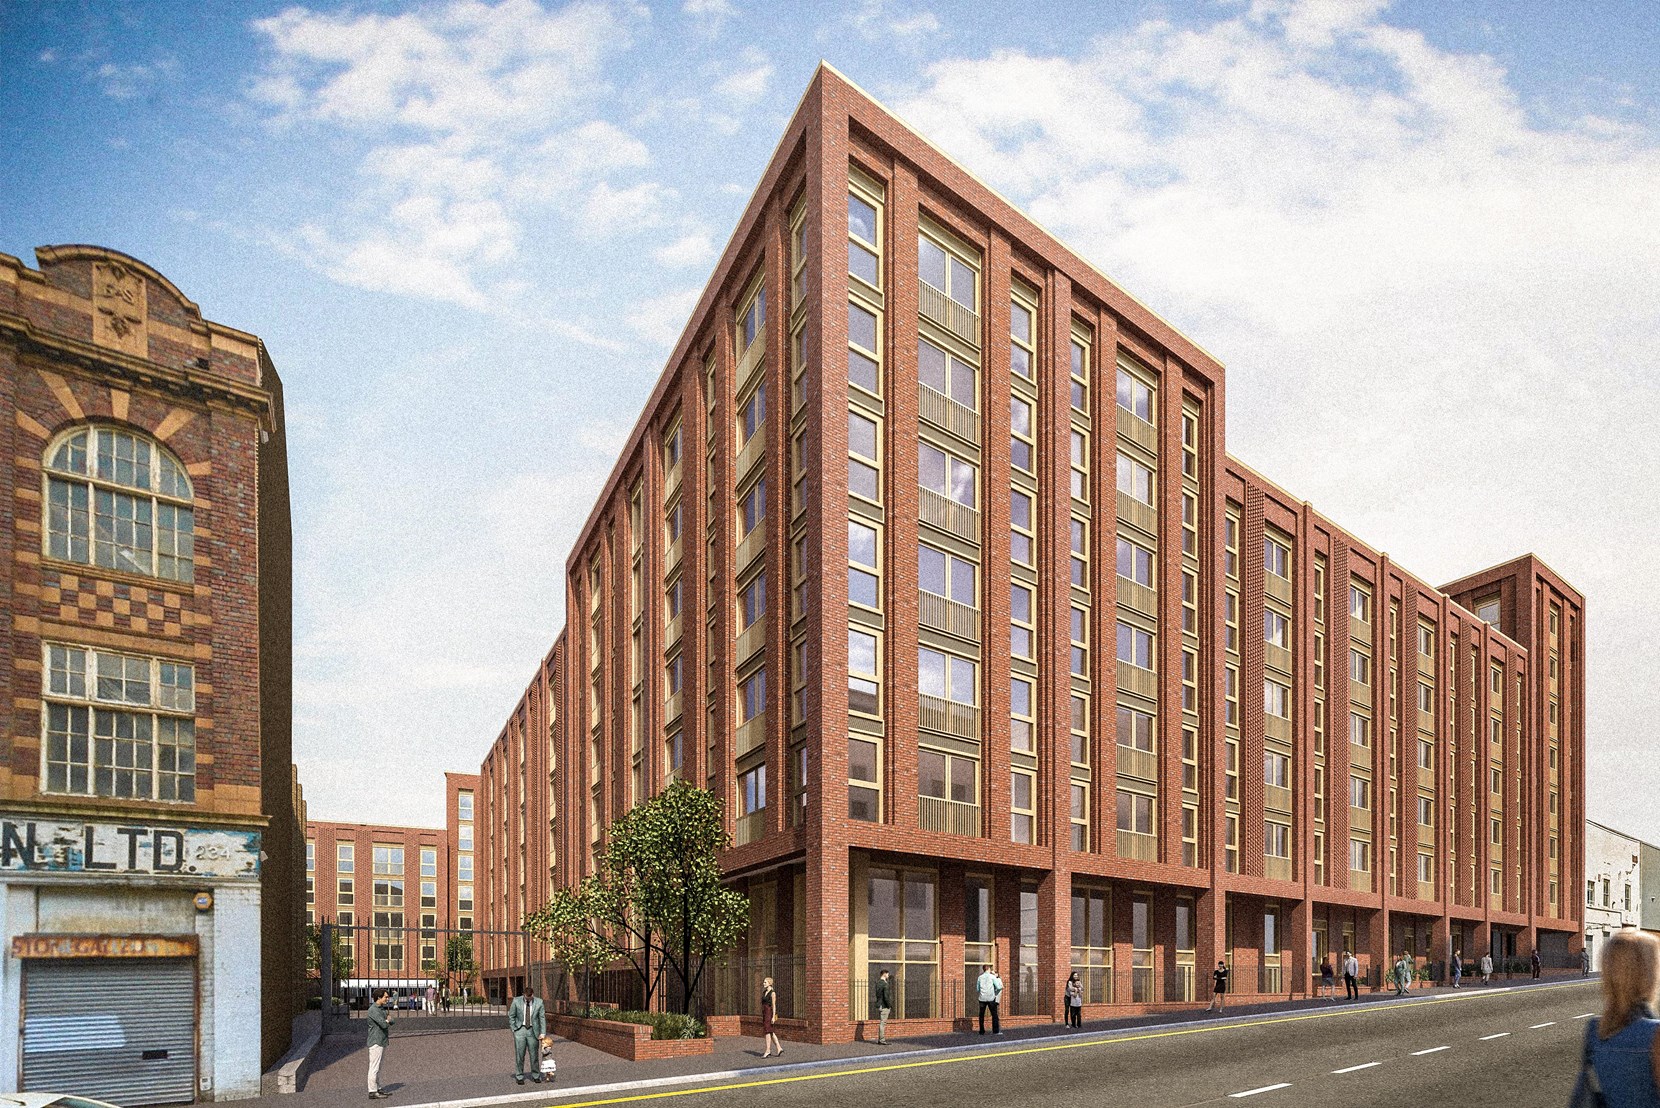 Apartments to Rent by ila at Hairpin House, Birmingham, B12, development panoramic